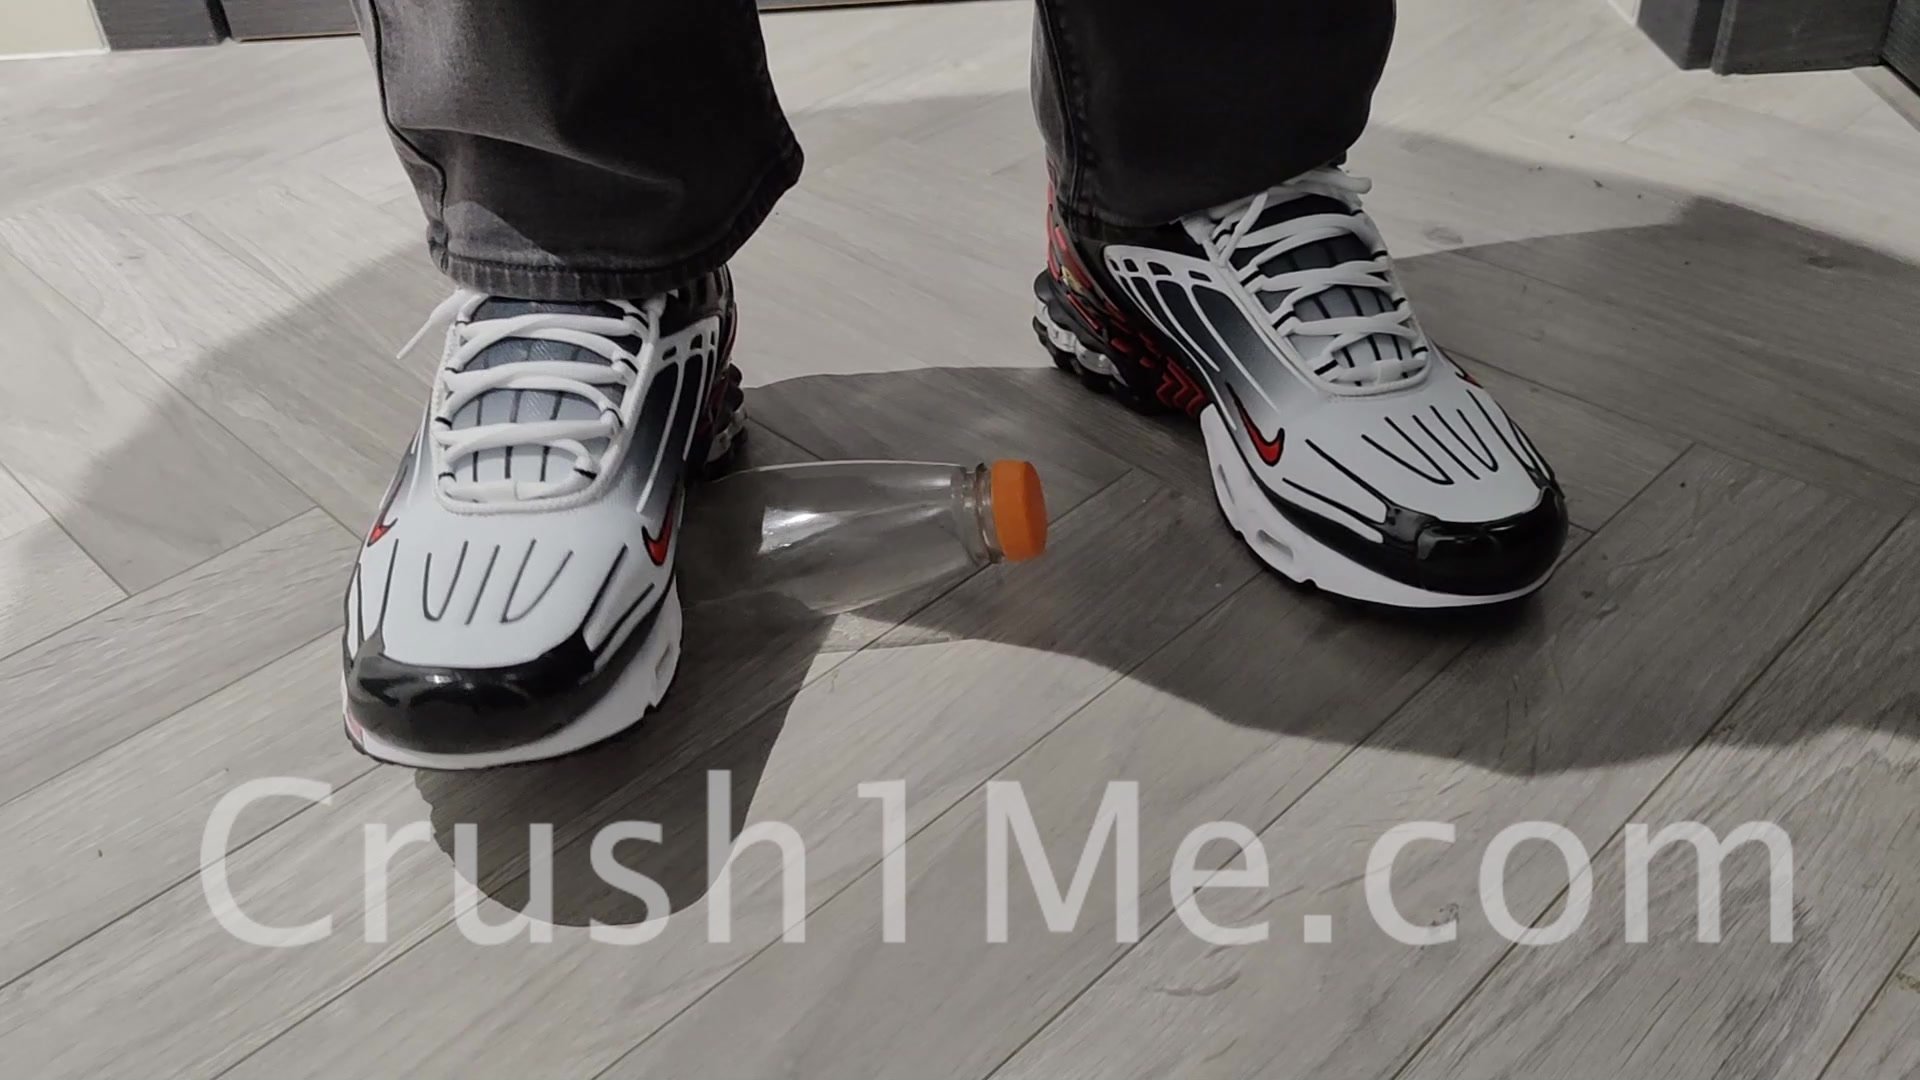 Nike Air Max Tuned 3 - Bottle Stomp Trample Crush